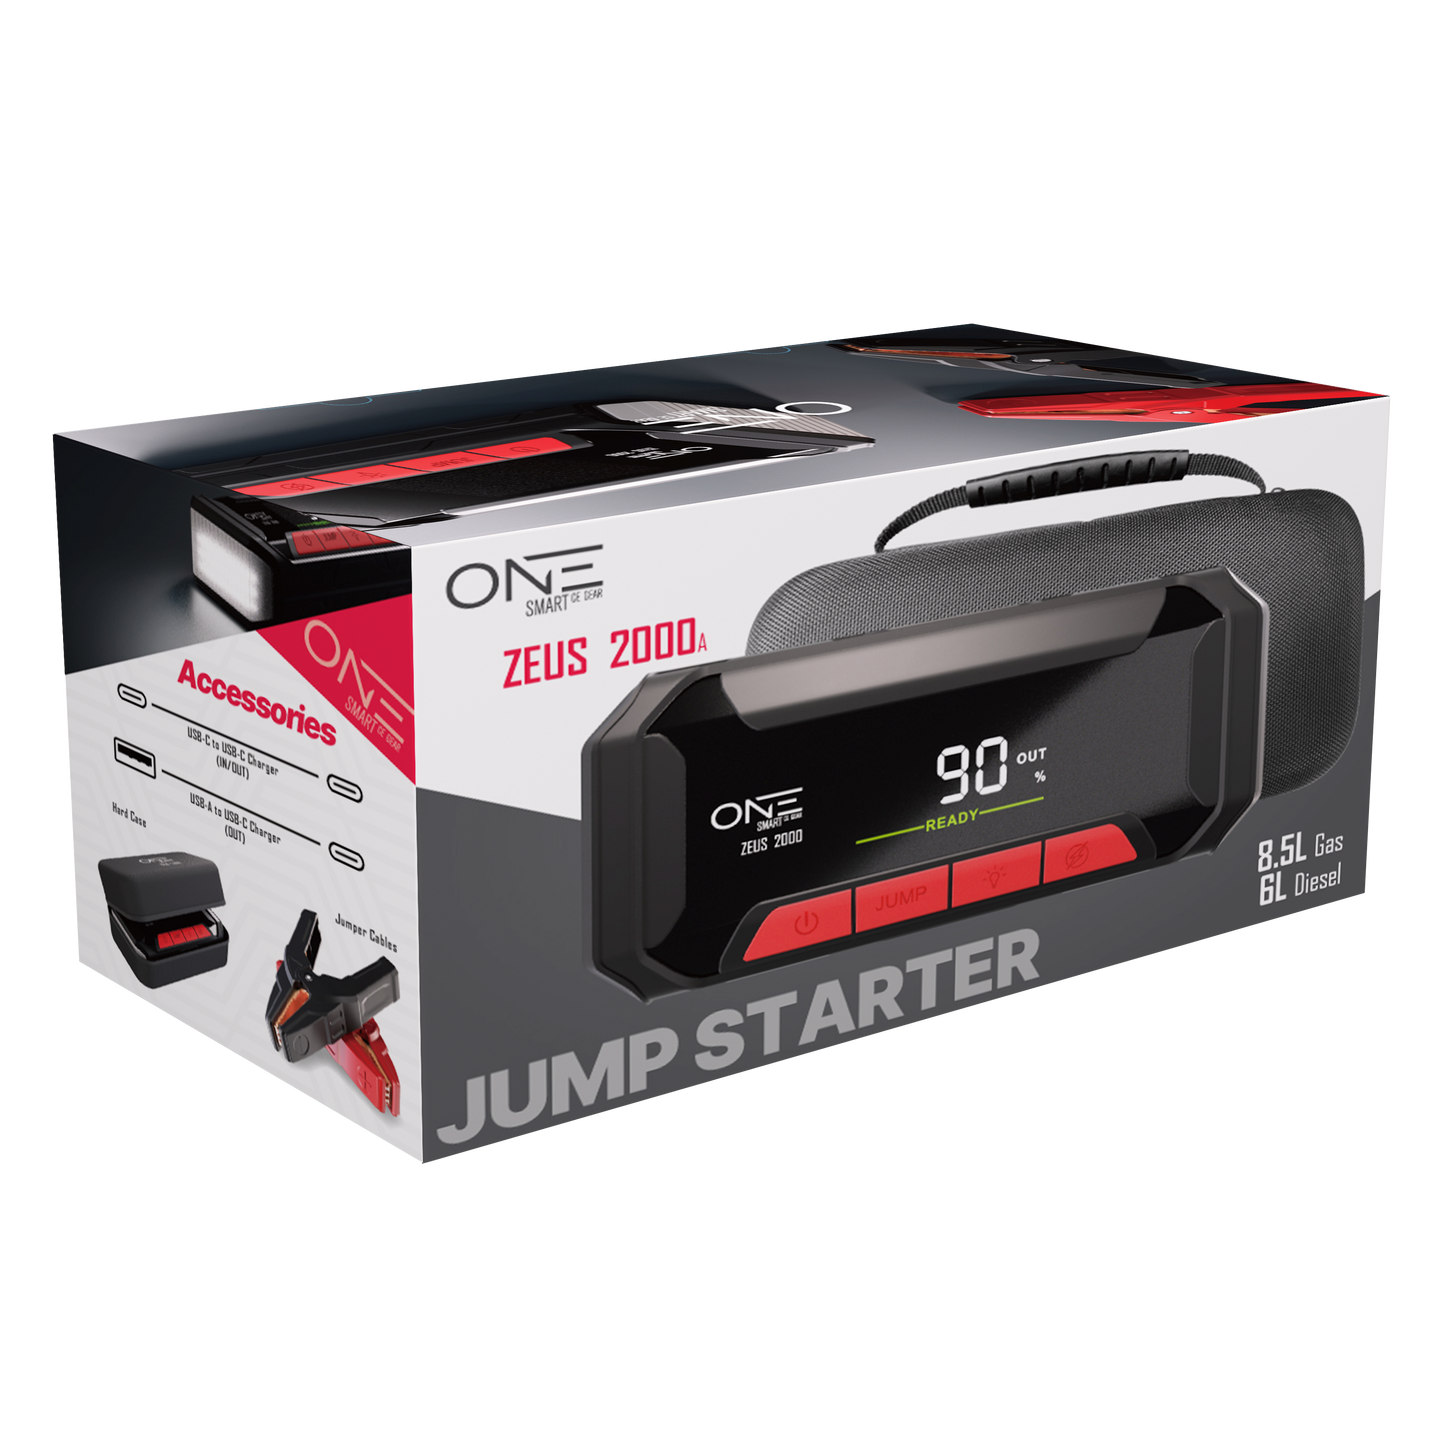 ONE Jump Starter 2000A Peak Battery Pack, Ultrasafe Car Battery Jumpstarter, 12V Jump Box for Battery up to 8.5L Gas/6L Diesel Engine, Battery Booster 65W Fast Charger, Portable Hard Case/Dust Tight(OAJS-2001)